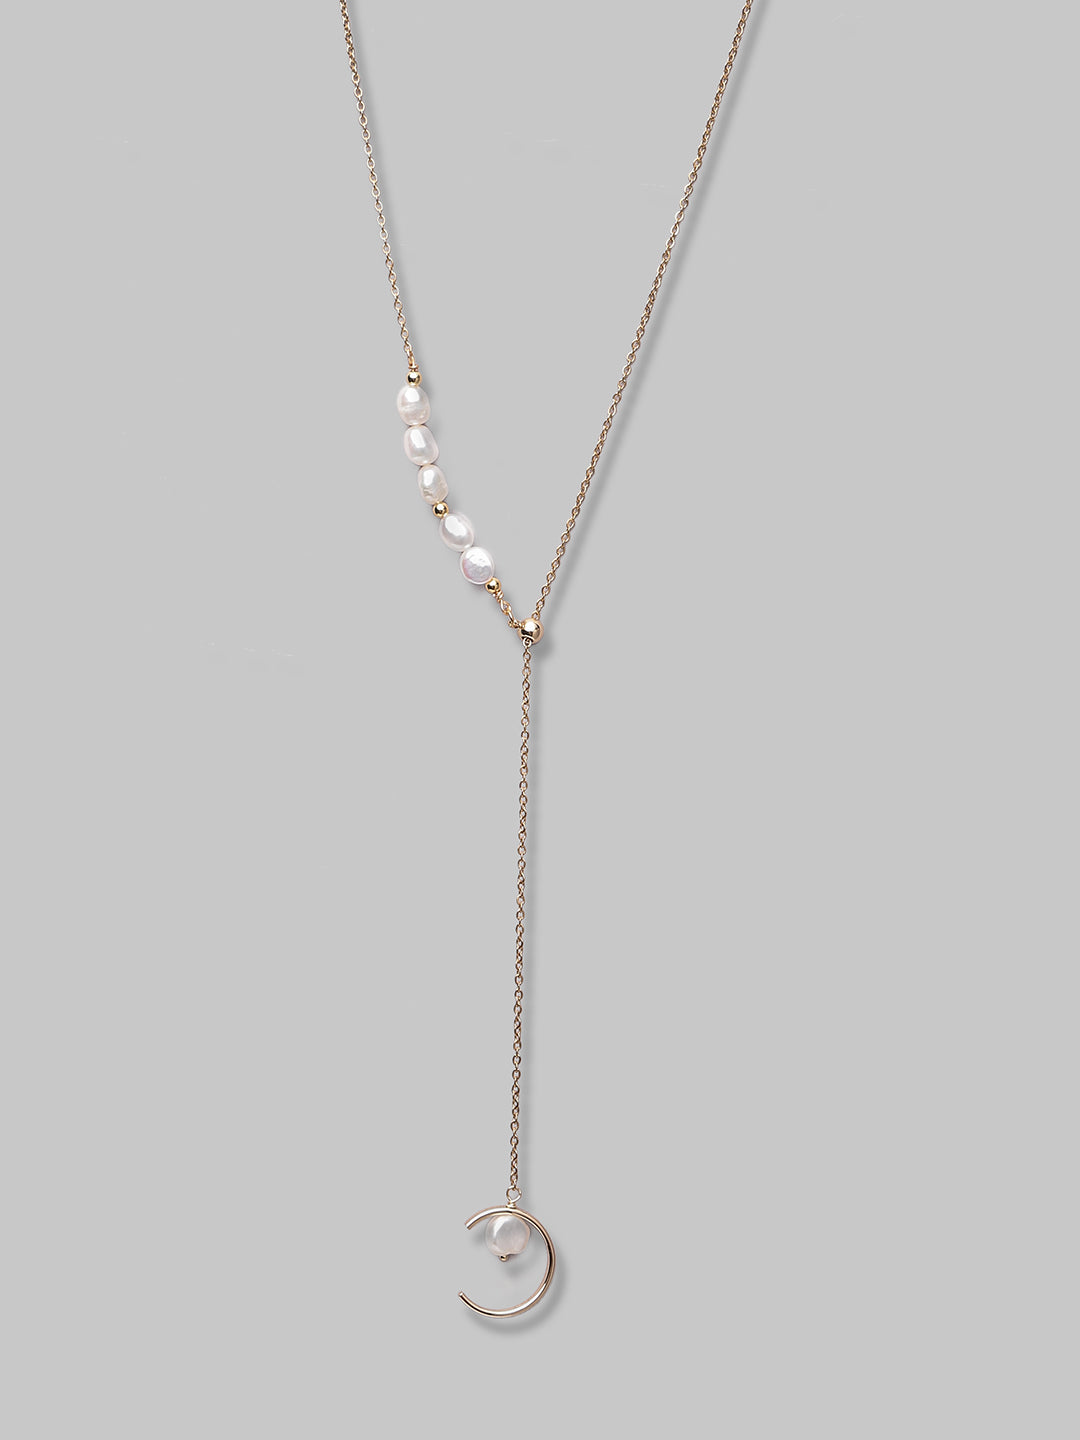 Latest White Pearl Design Lightweight Chain For Women And Girls